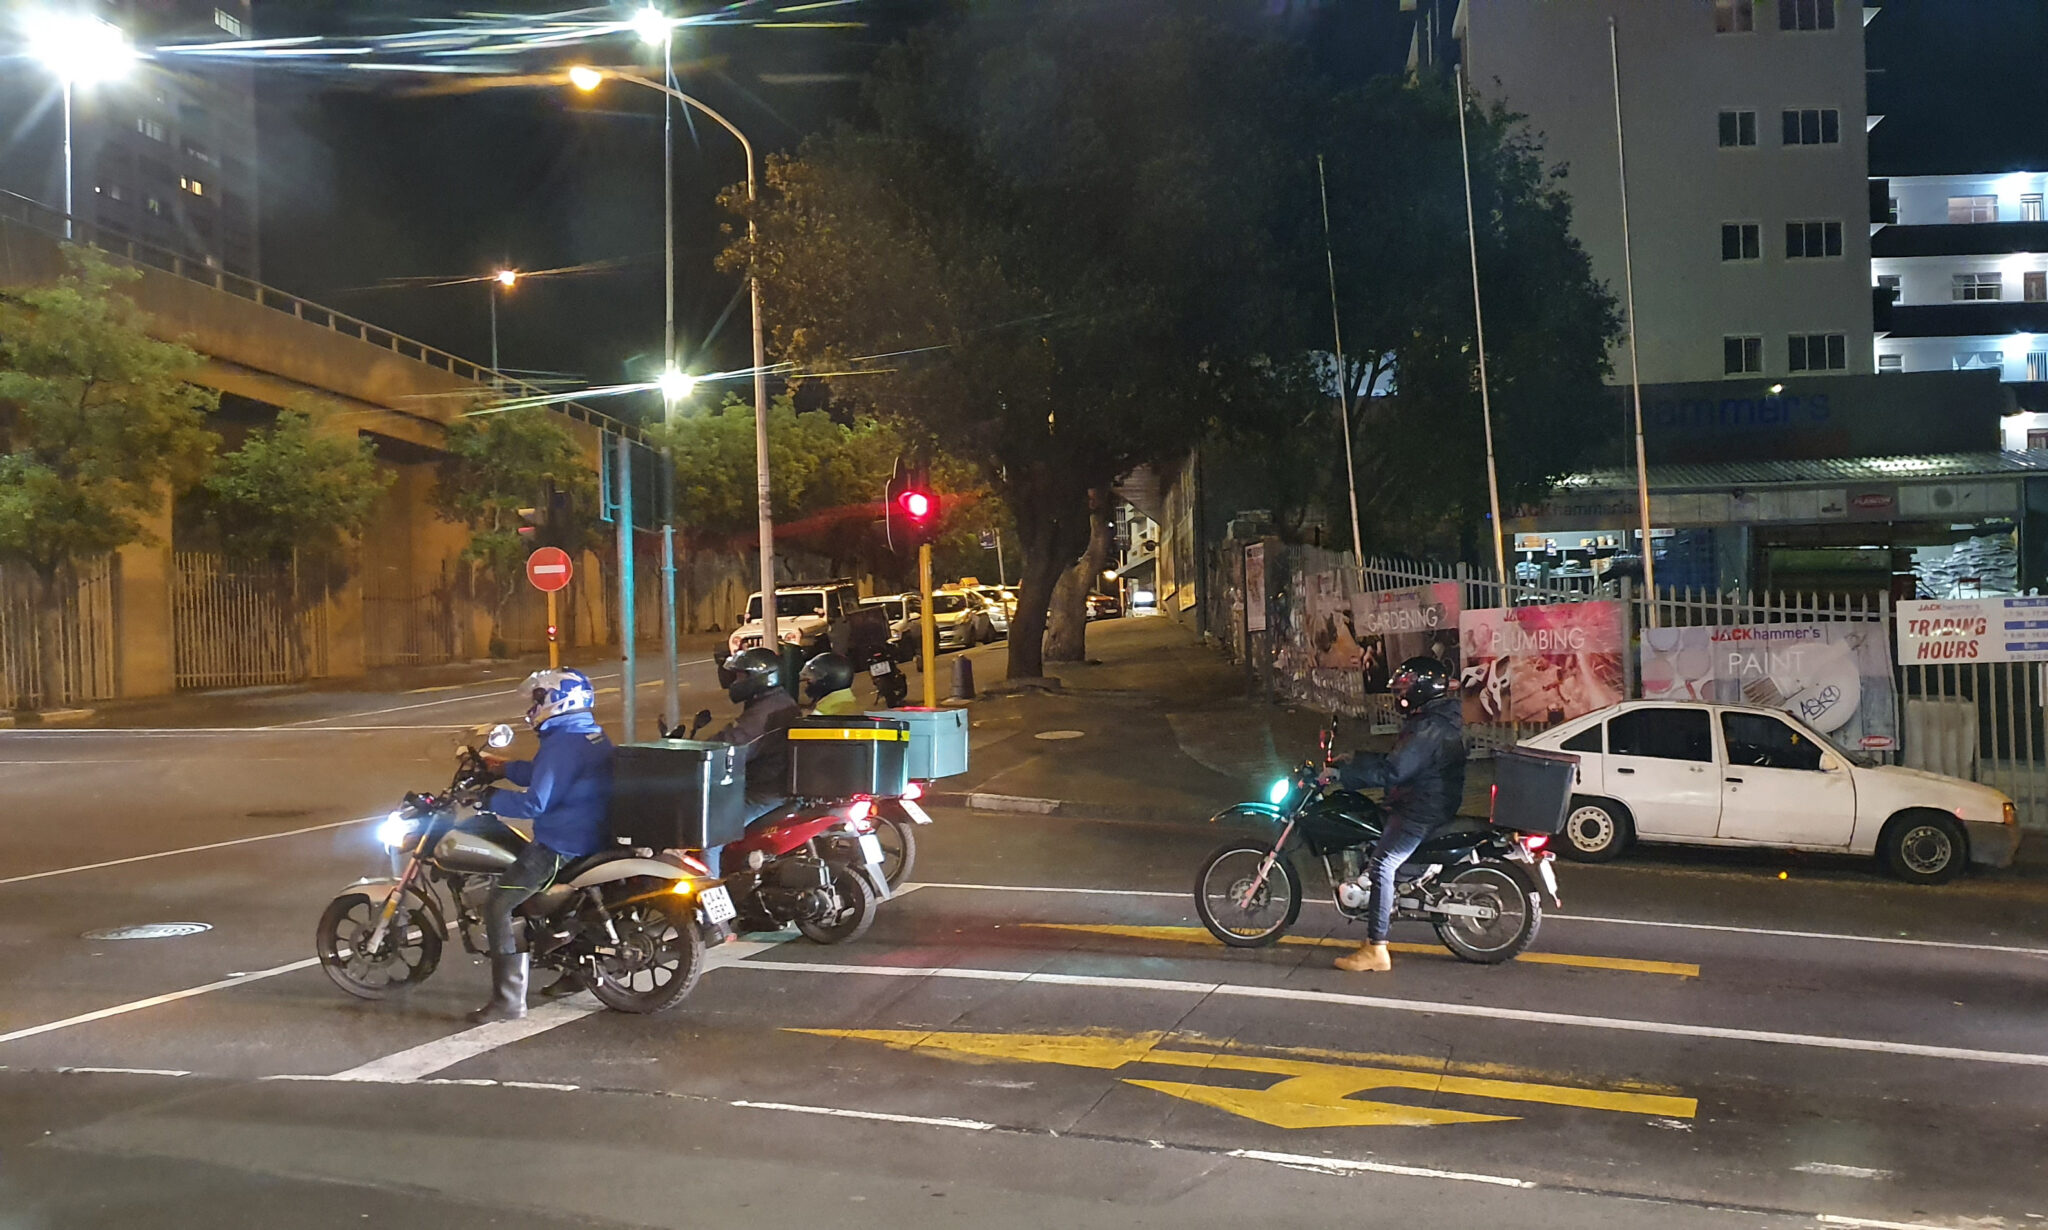 Motorcycle couriers, at night, are waiting at the intersection of stop light, Buitenkant Street and Mill Streets in Cape Town, South Africa.